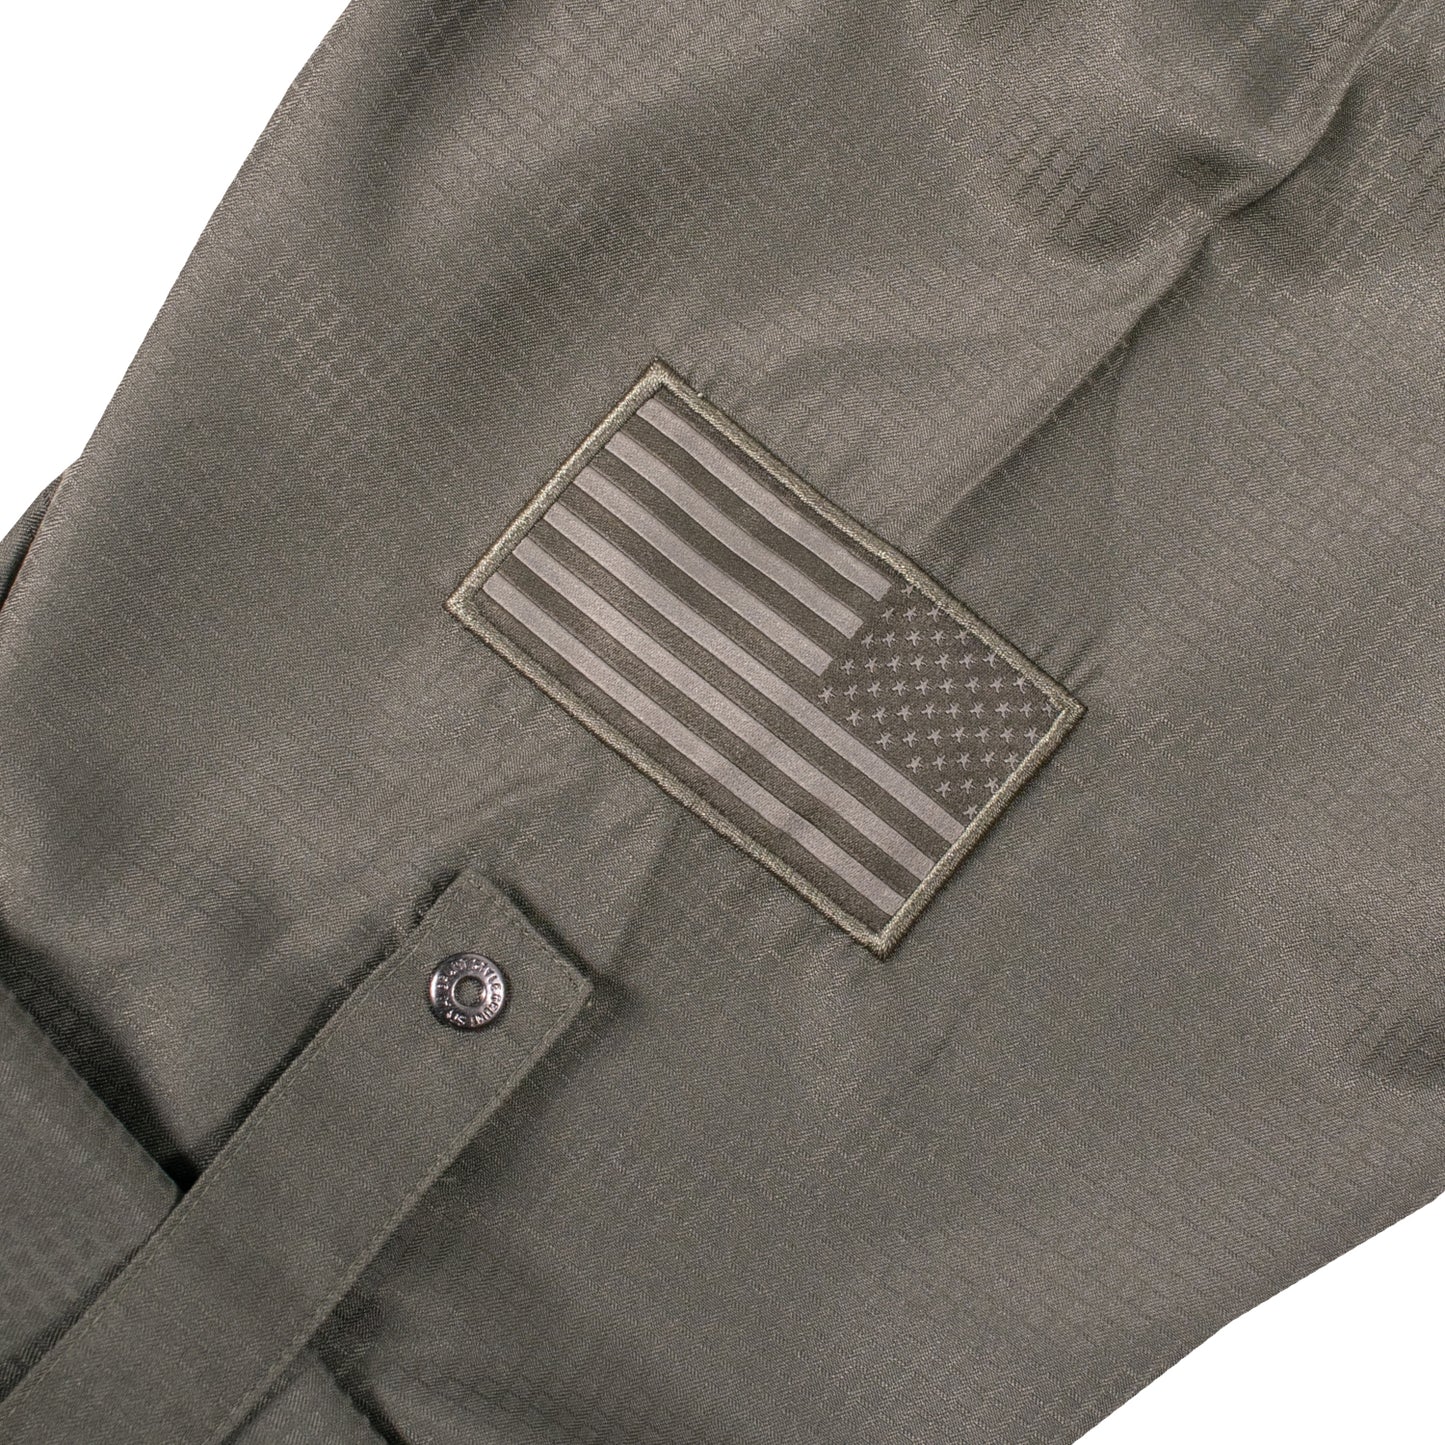 Sleeve of the Grunt Style Long Sleeve Fishing Shirt  in Olive that has the Assaulting flag logo, sleeve roll up tab, and custom buttons